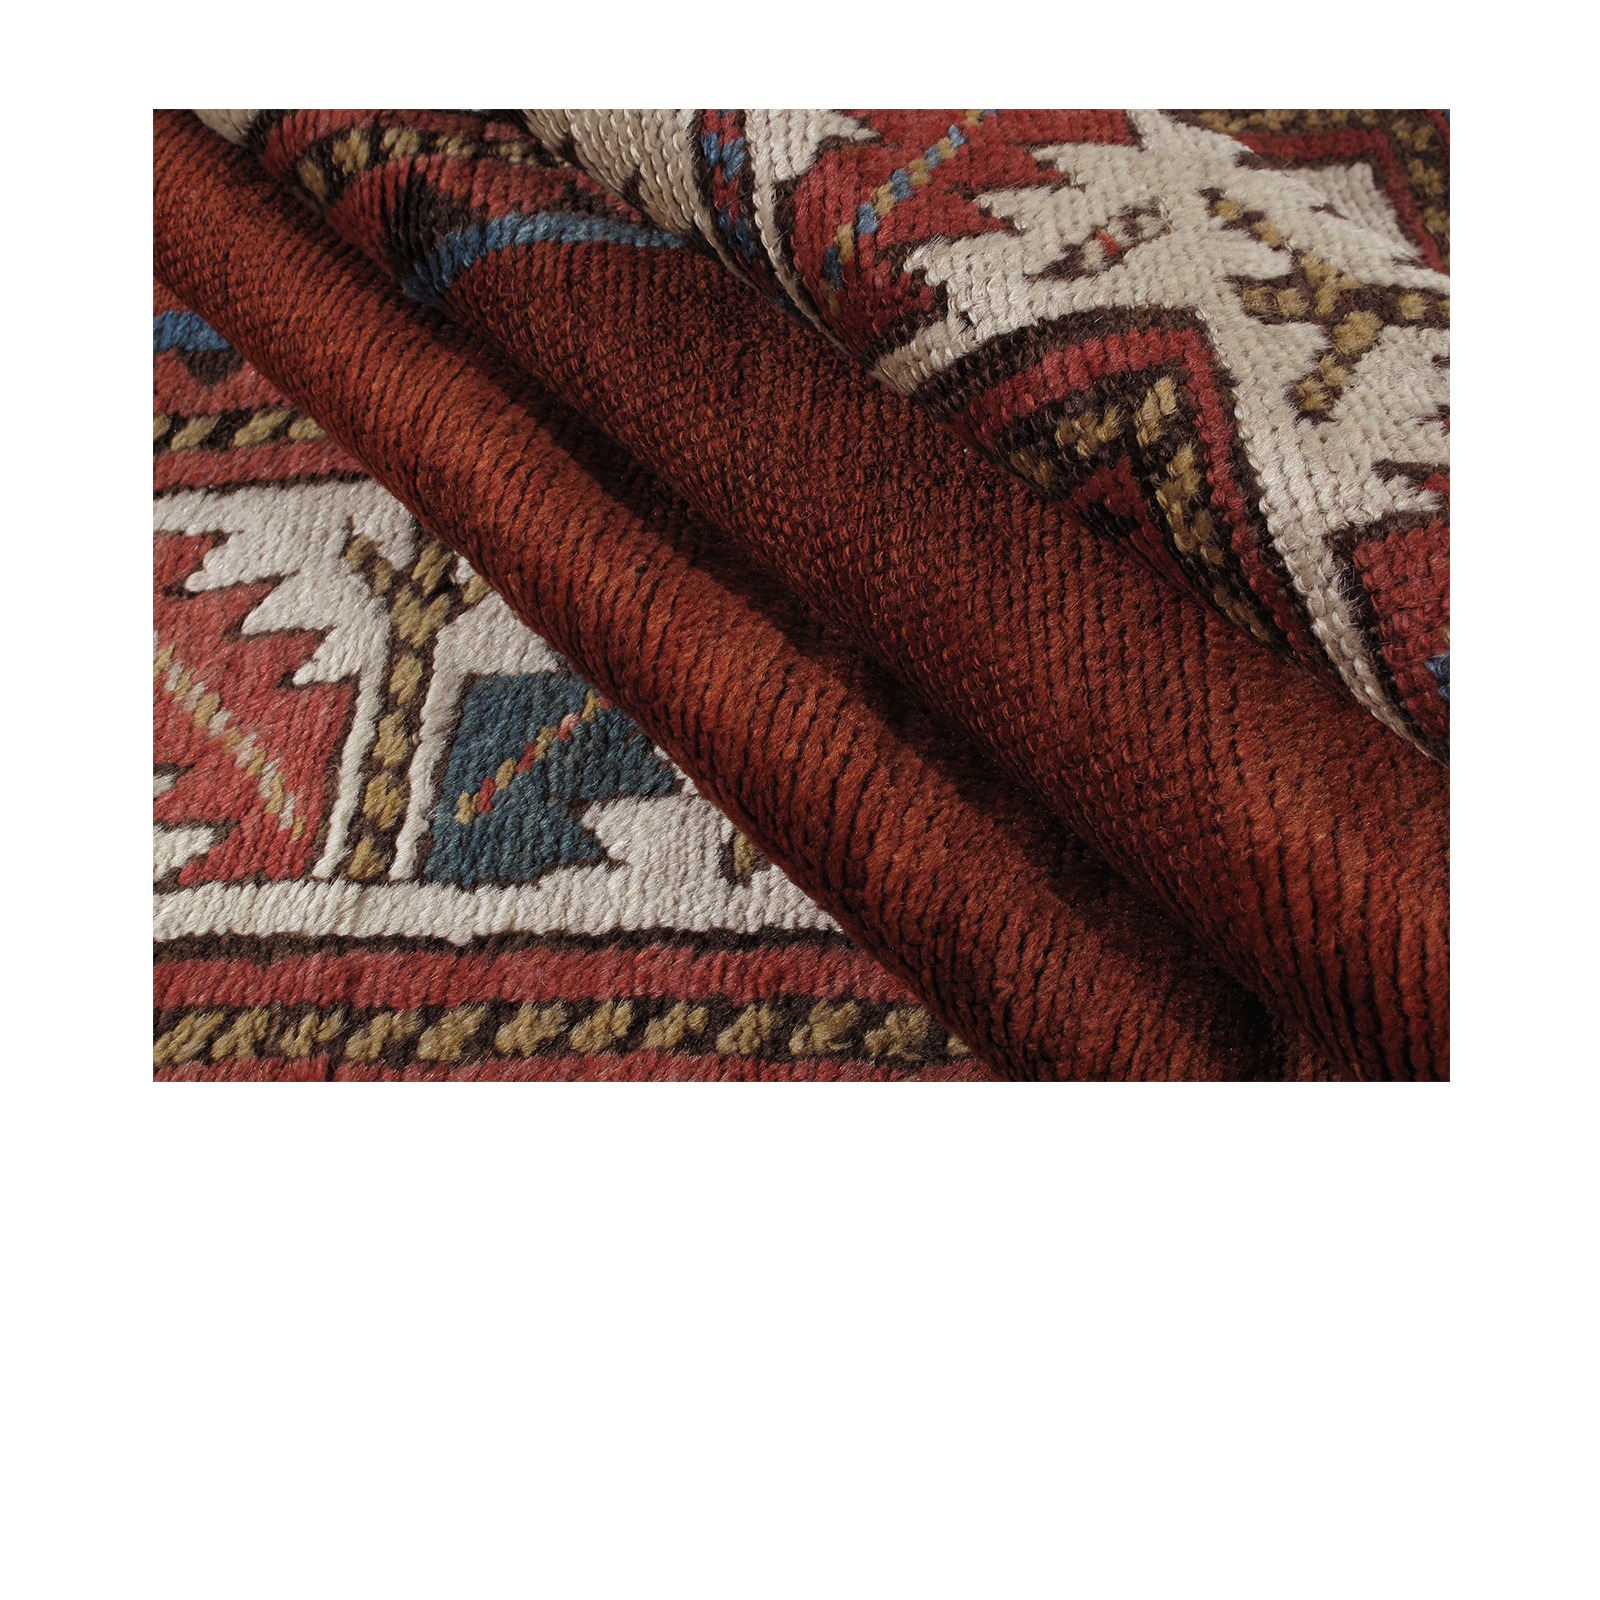 This Kurdish rug  is crafted using hand-carded Persian wool and natural dyes.